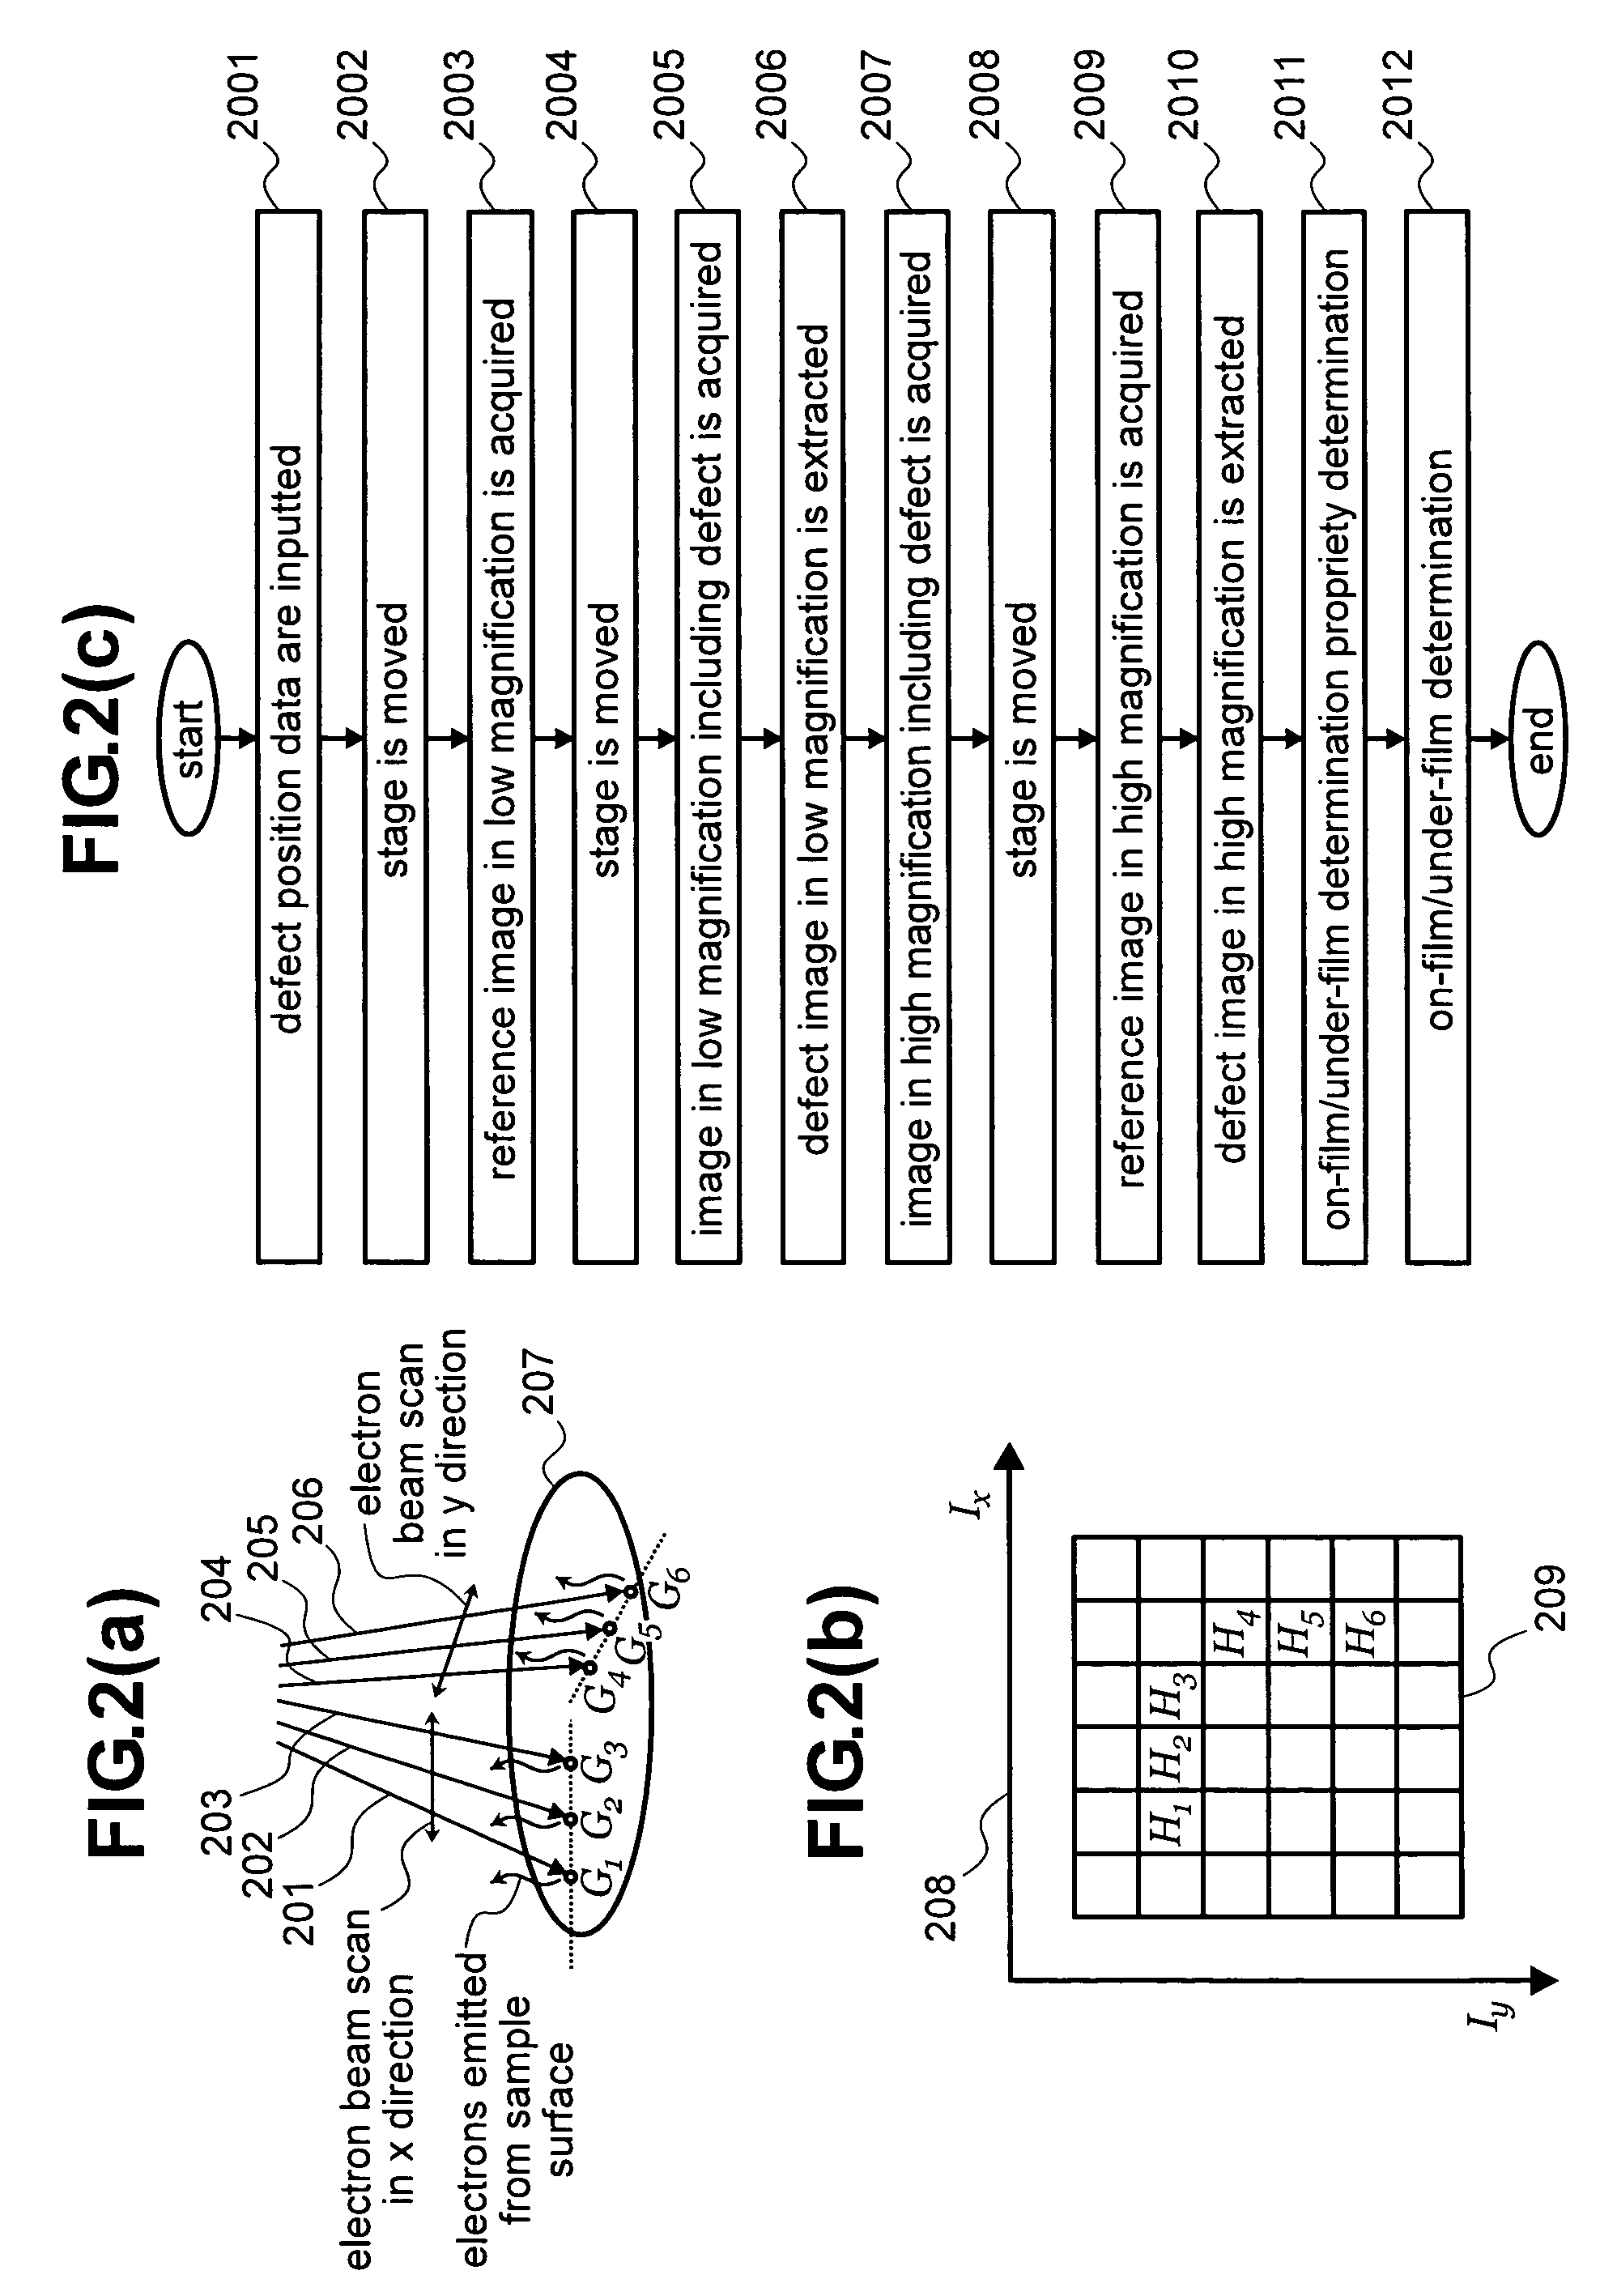 Method and apparatus of reviewing defects on a semiconductor device